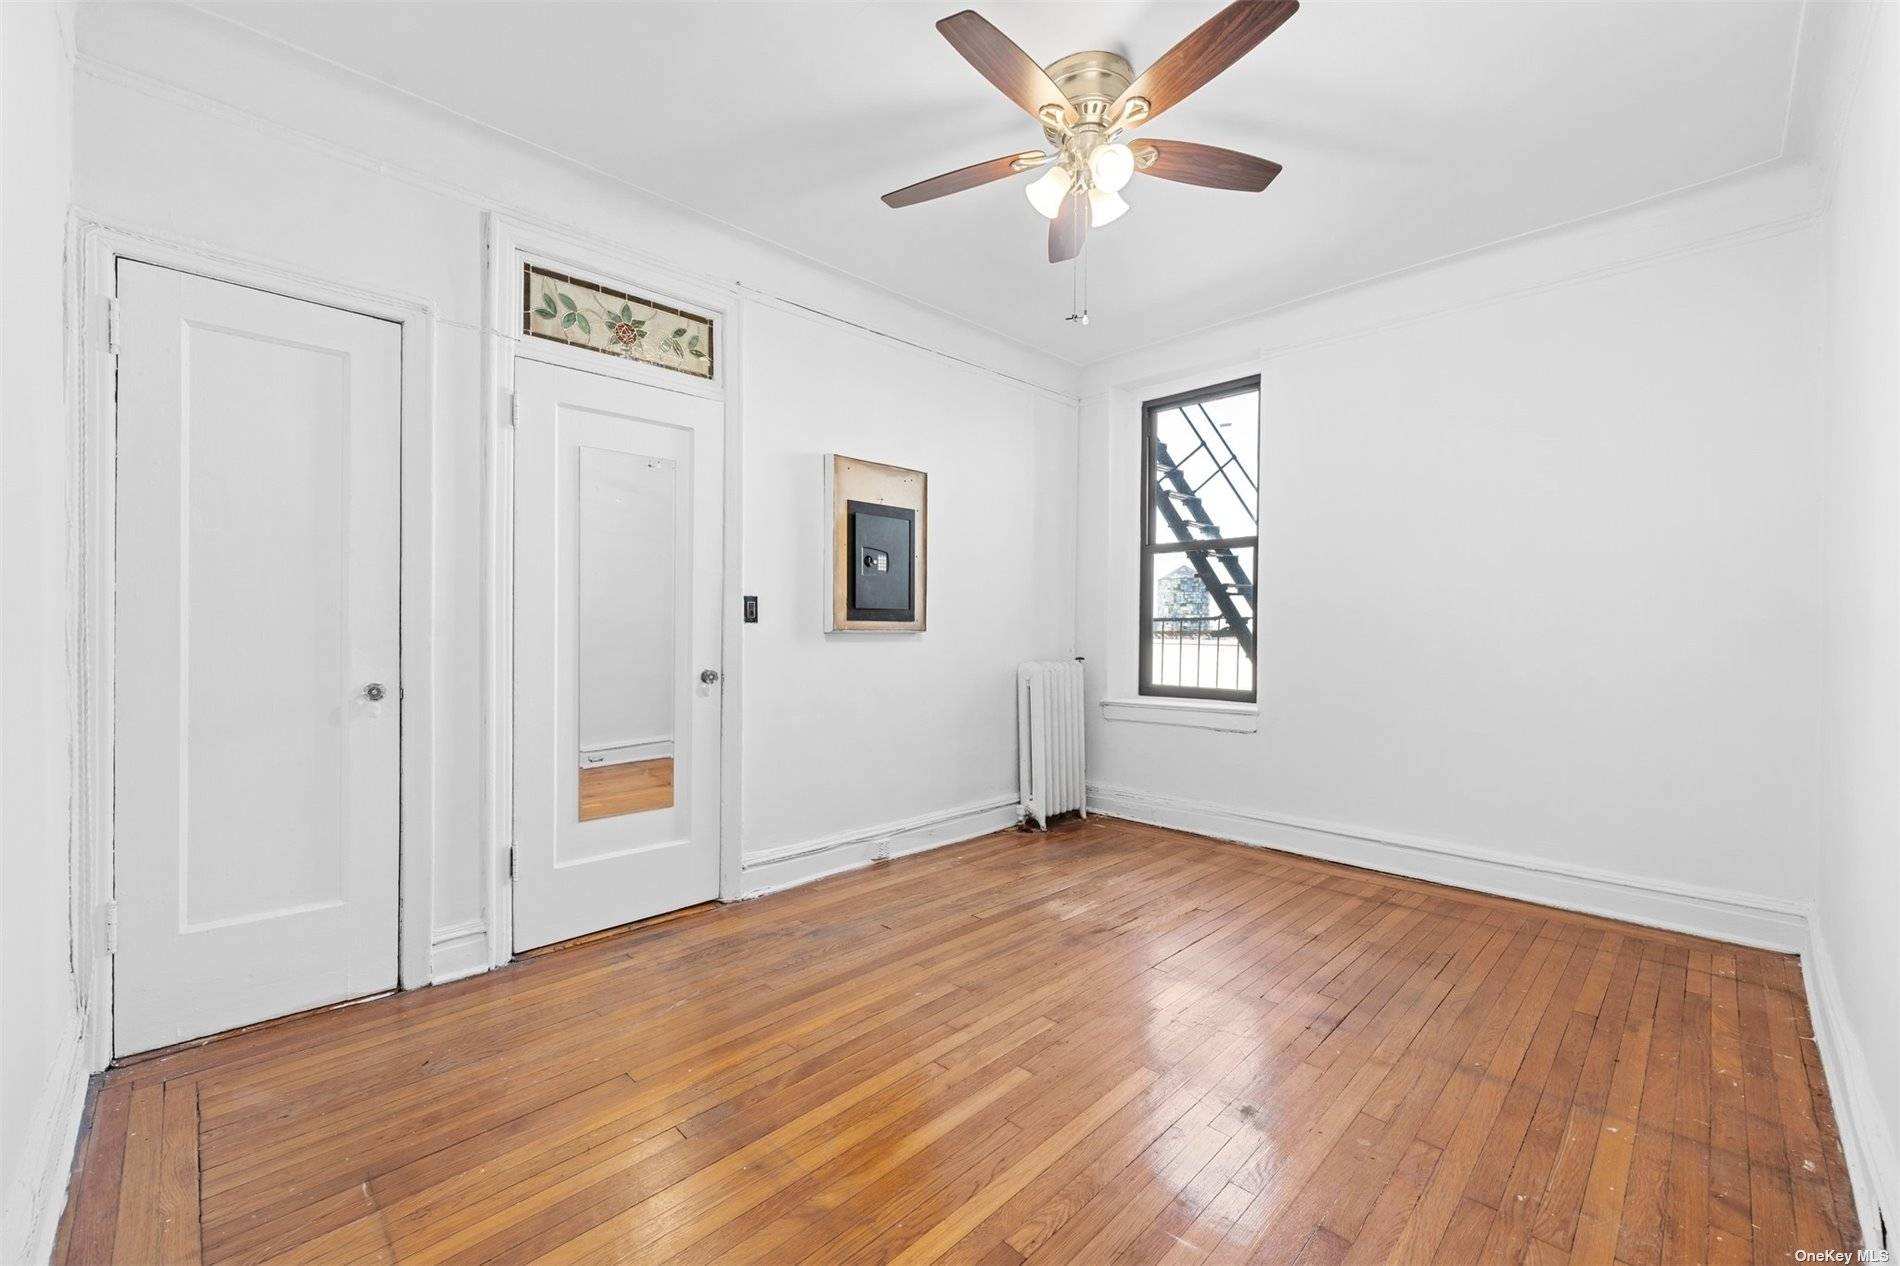 Prime Location With Sky Line Views 1 Bedroom Coop in Brooklyn Heights Apartment is Ready To Make Your Own, Located On The First Floor of 2 Grace Court a pre ...